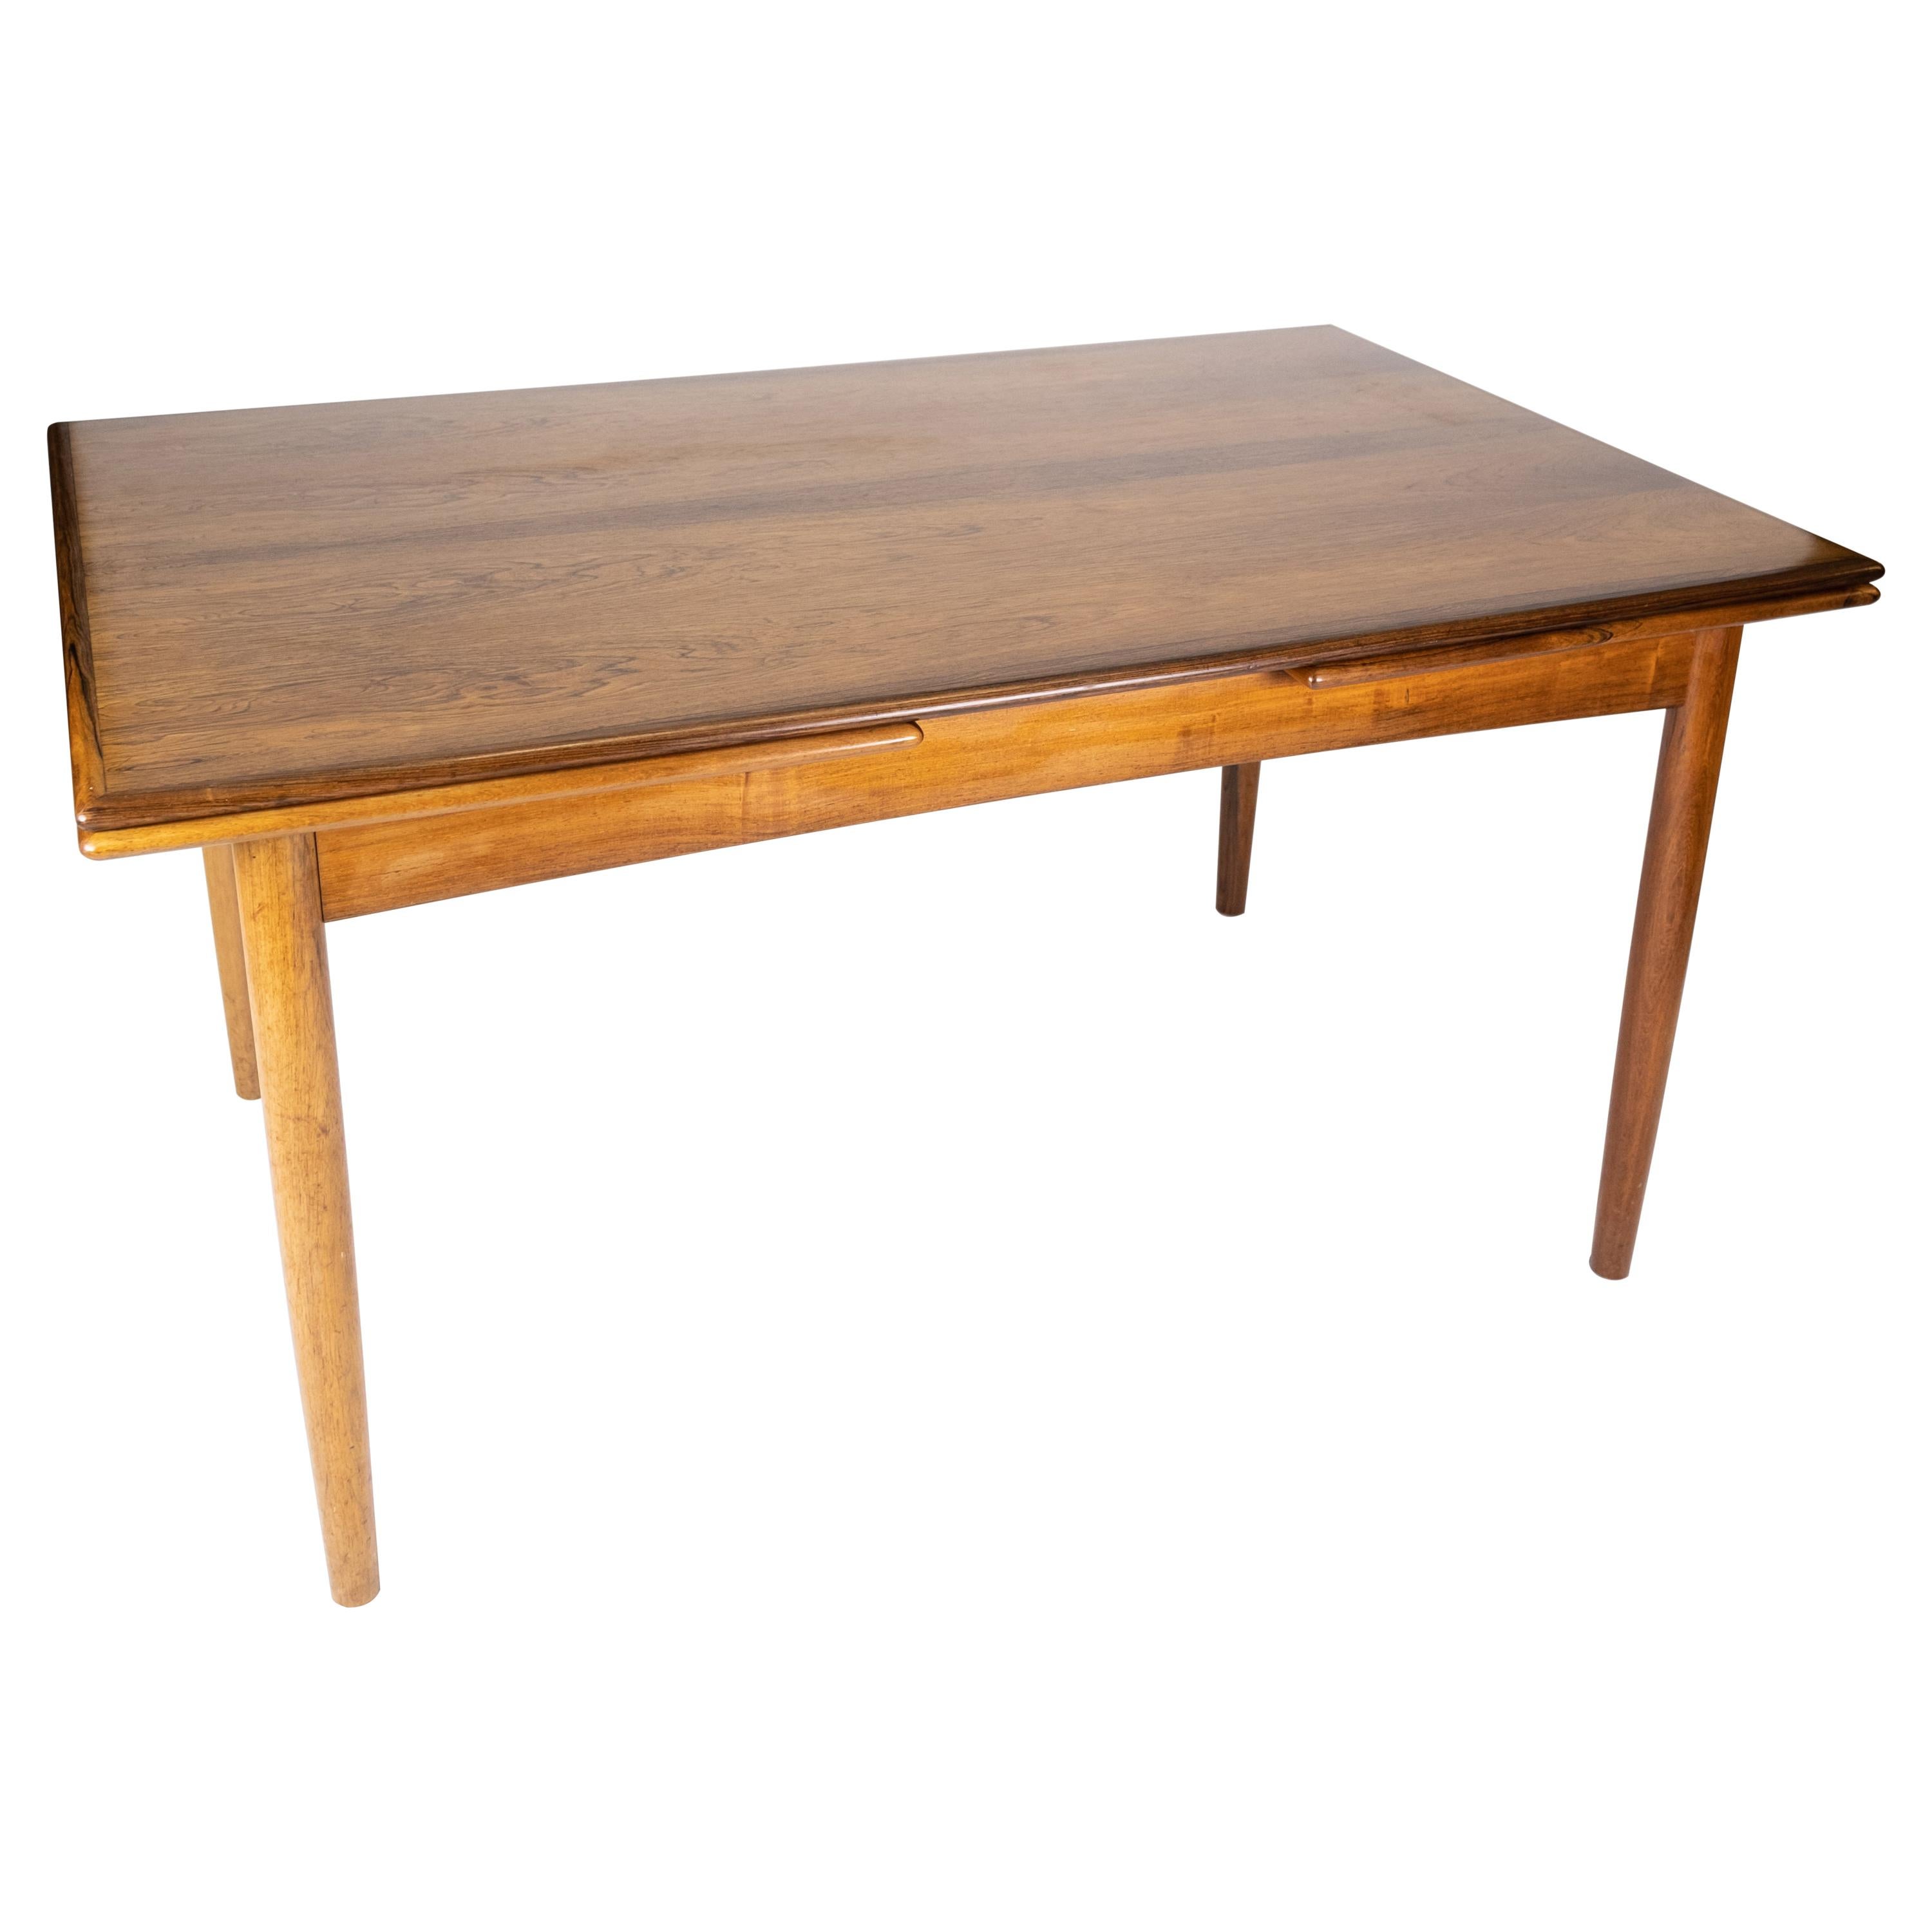 Dining Table Made In Rosewood With Extensions, Danish Design From 1960s